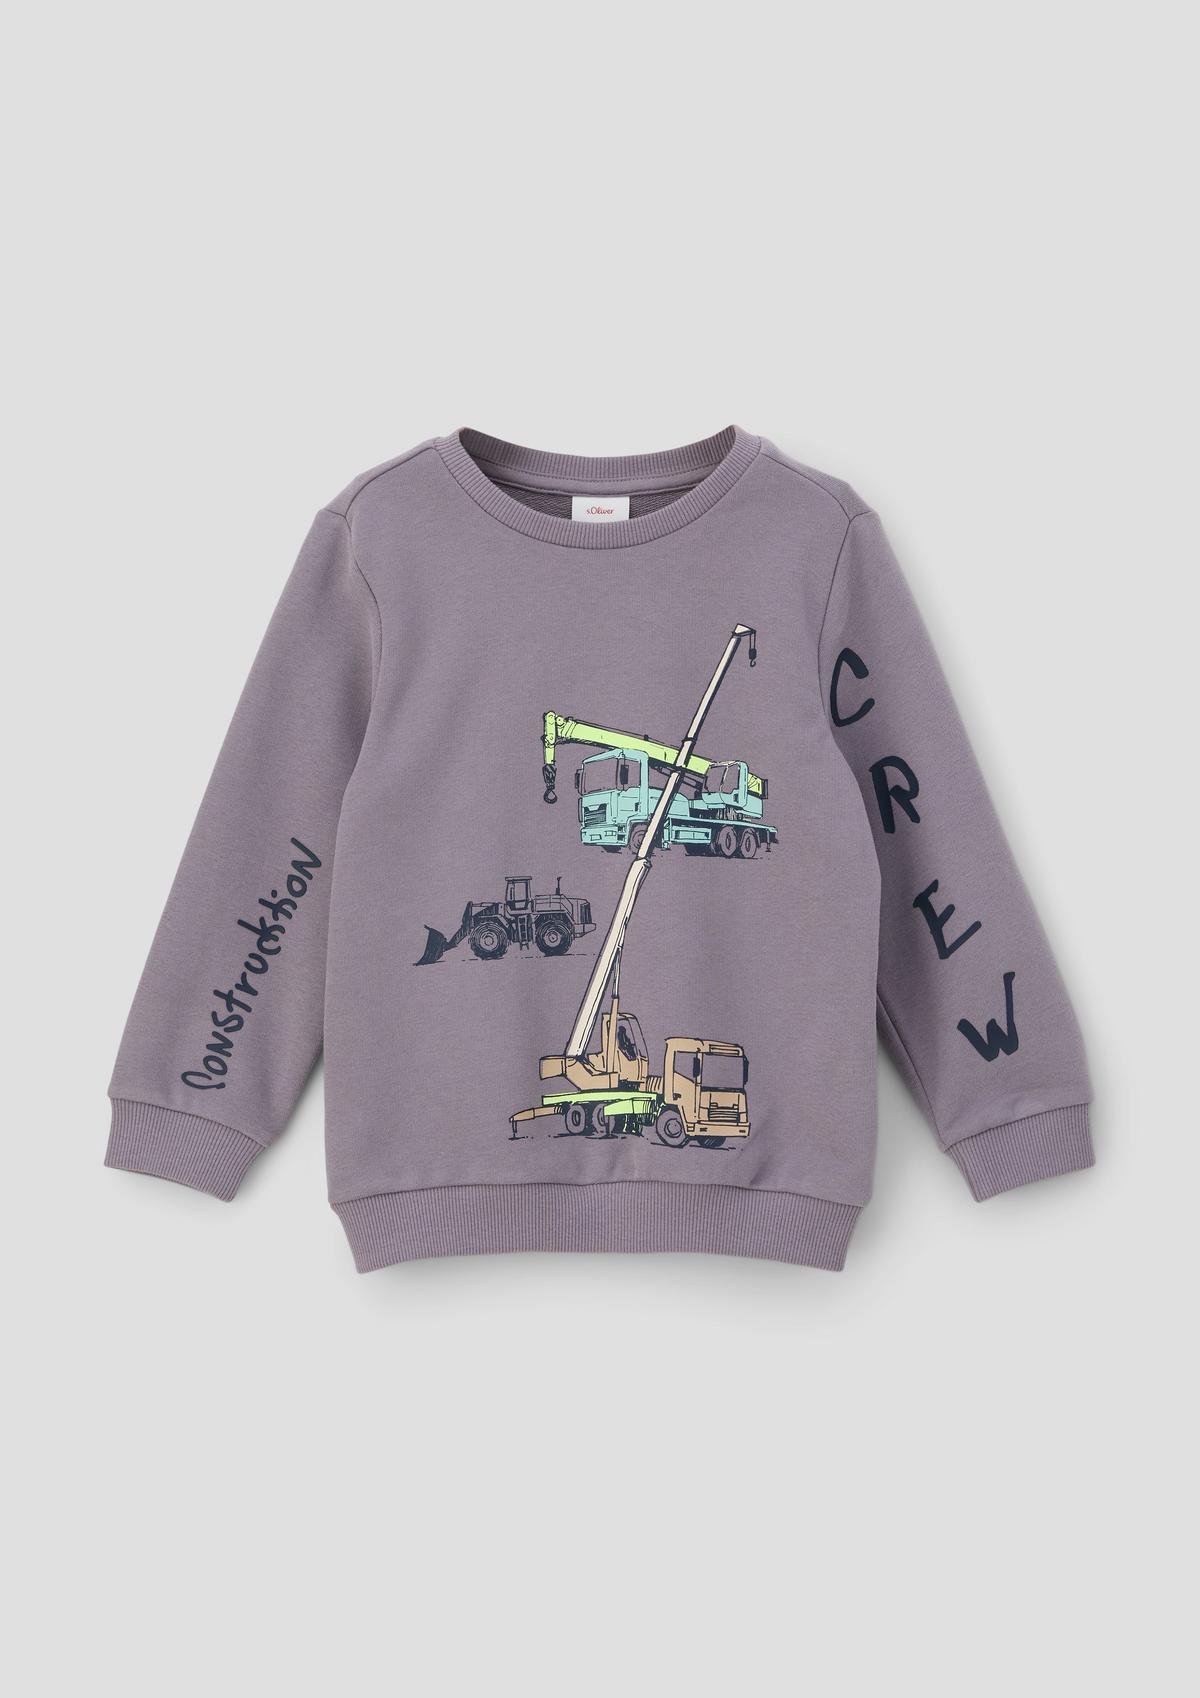 and knitwear boys Sweatshirts for online